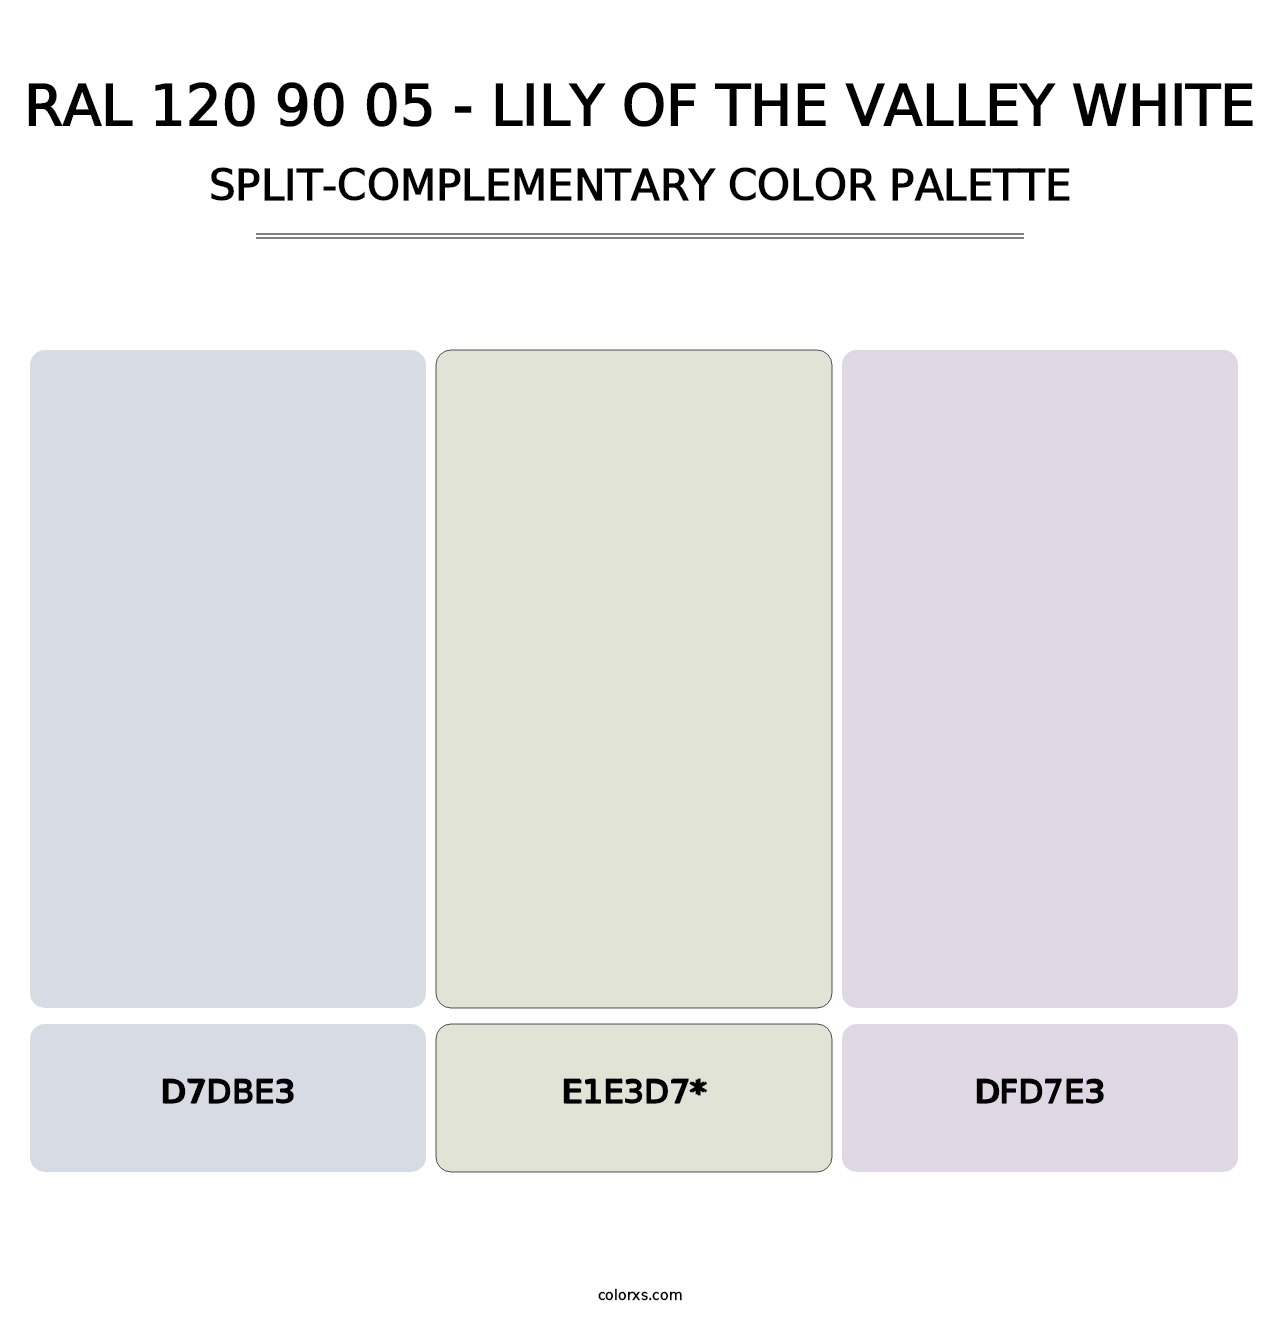 RAL 120 90 05 - Lily of the Valley White - Split-Complementary Color Palette